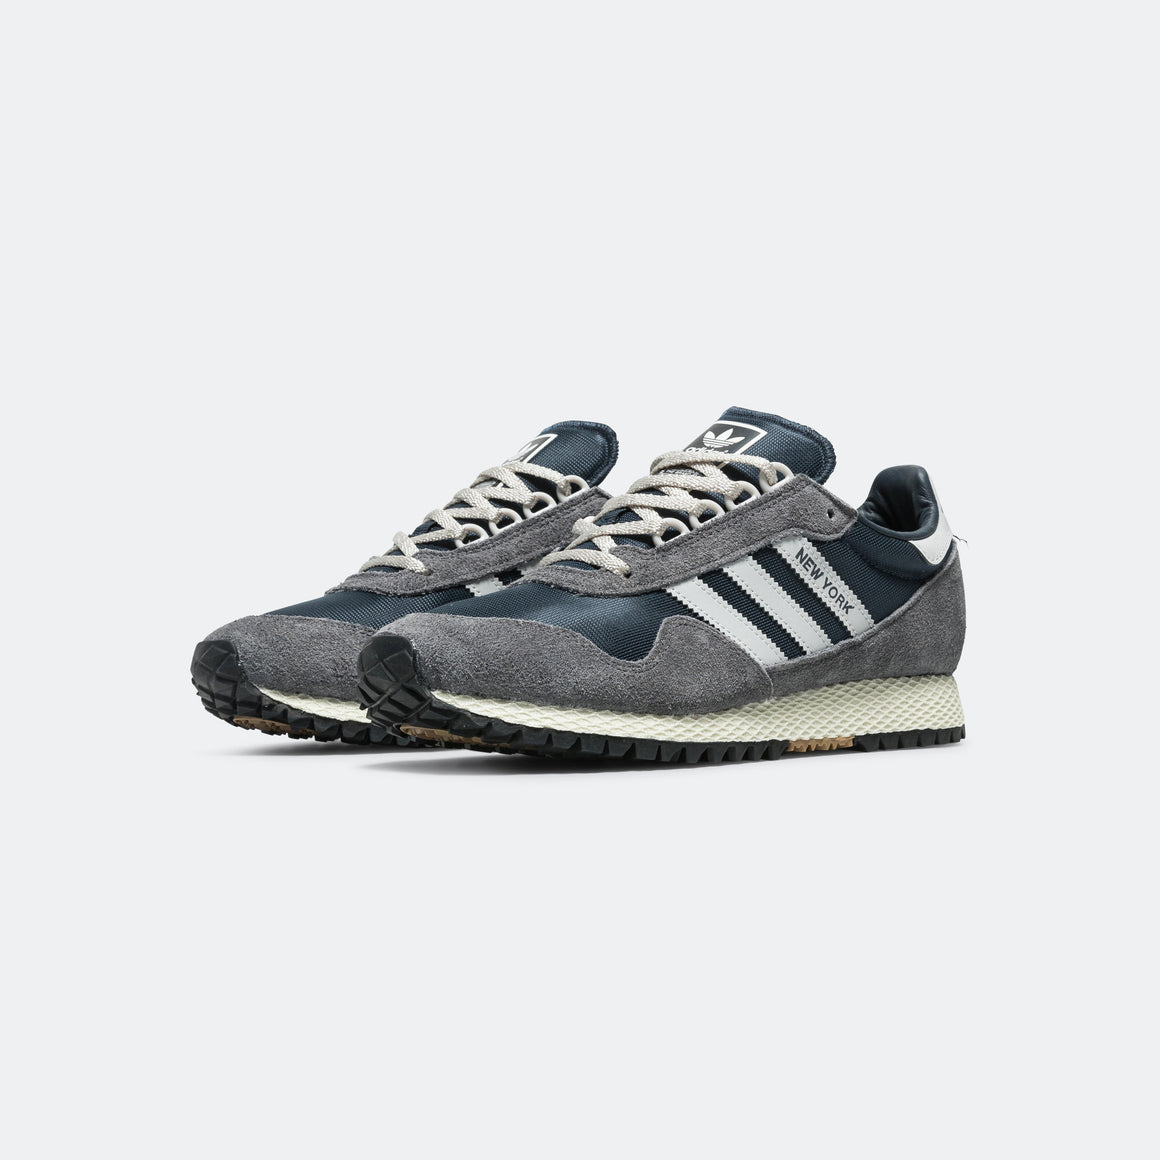 adidas - New York - Aurora Ink/Grey One-Core Black - UP THERE